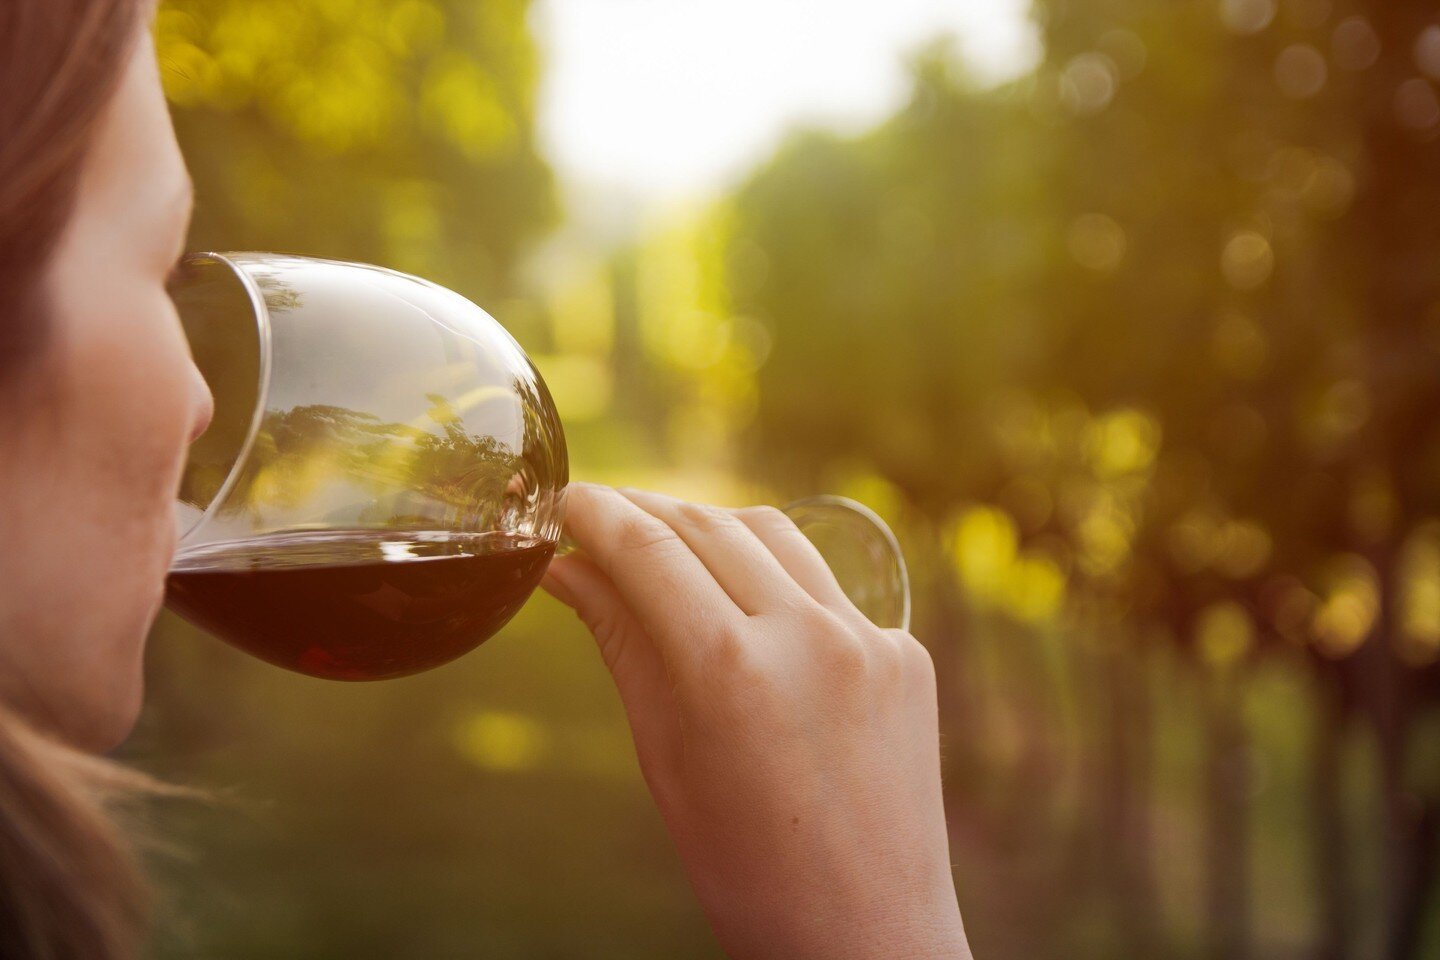 Tea and wine could help stave off dementia 'exciting' study finds - other beneficial foods 

Read more on our Facebook page 

#winetasting #nottingham #arnold #westbridgford #ravenshead #sherwood #mapperley #selby #york #goole #radcliffeontrent #crop